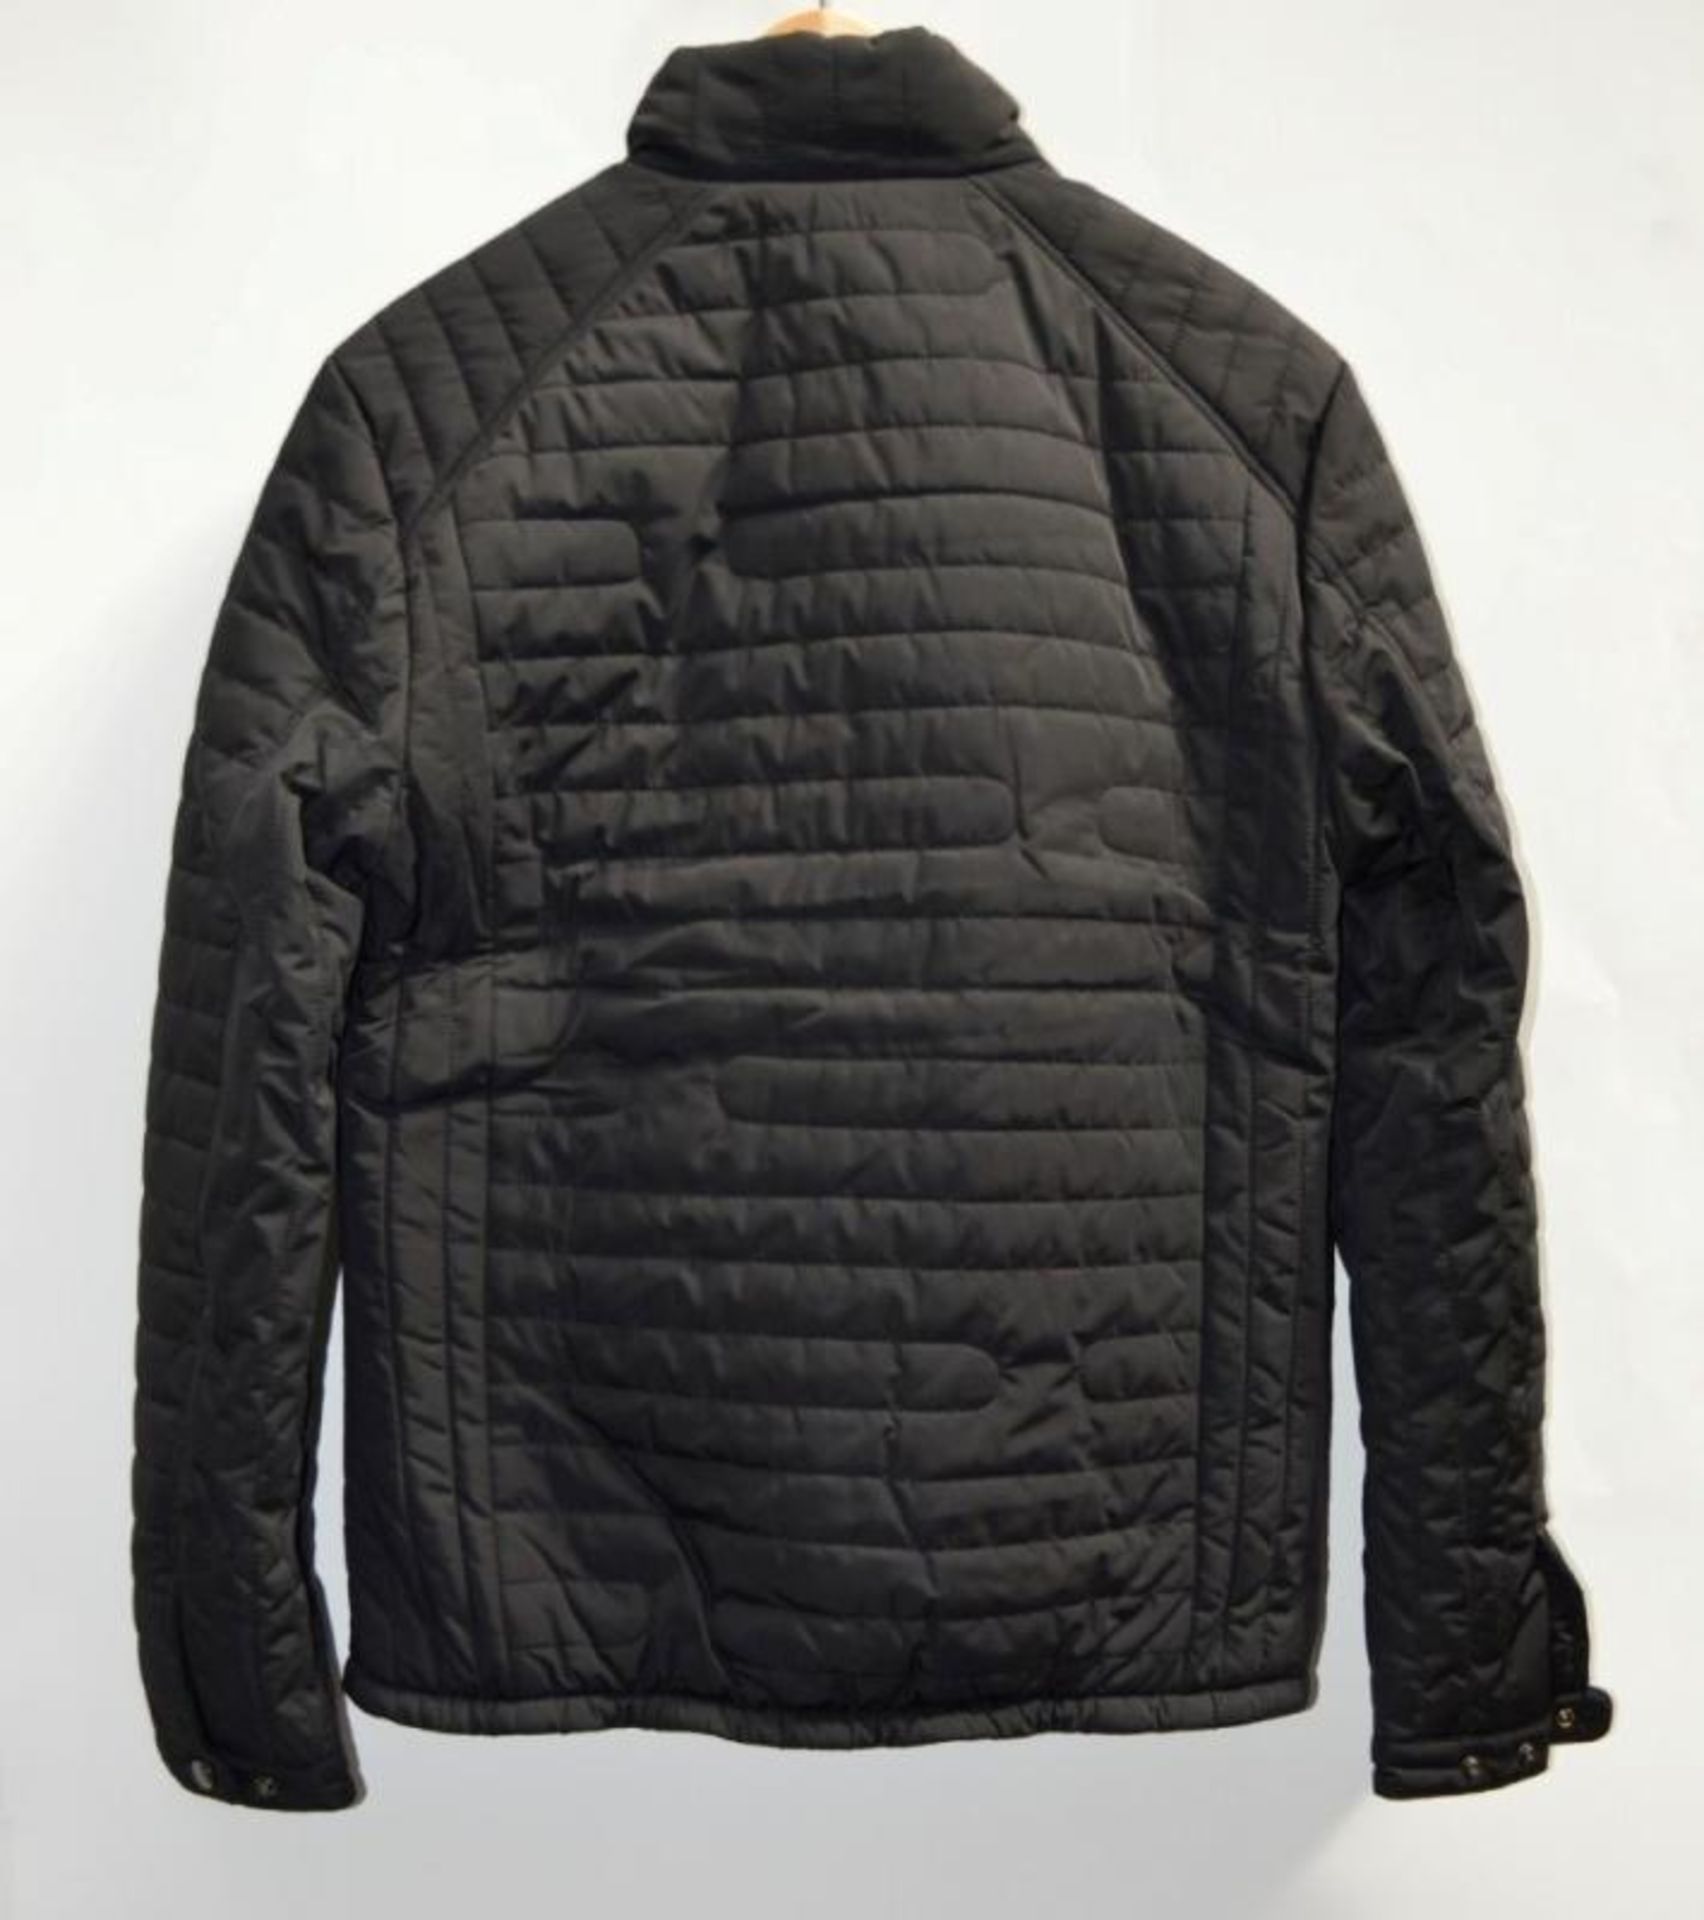 1 x GNIOUS "Black Label" Mens Coat - New Stock With Tags - Recent Store Closure - Colour: Black - - Image 5 of 5